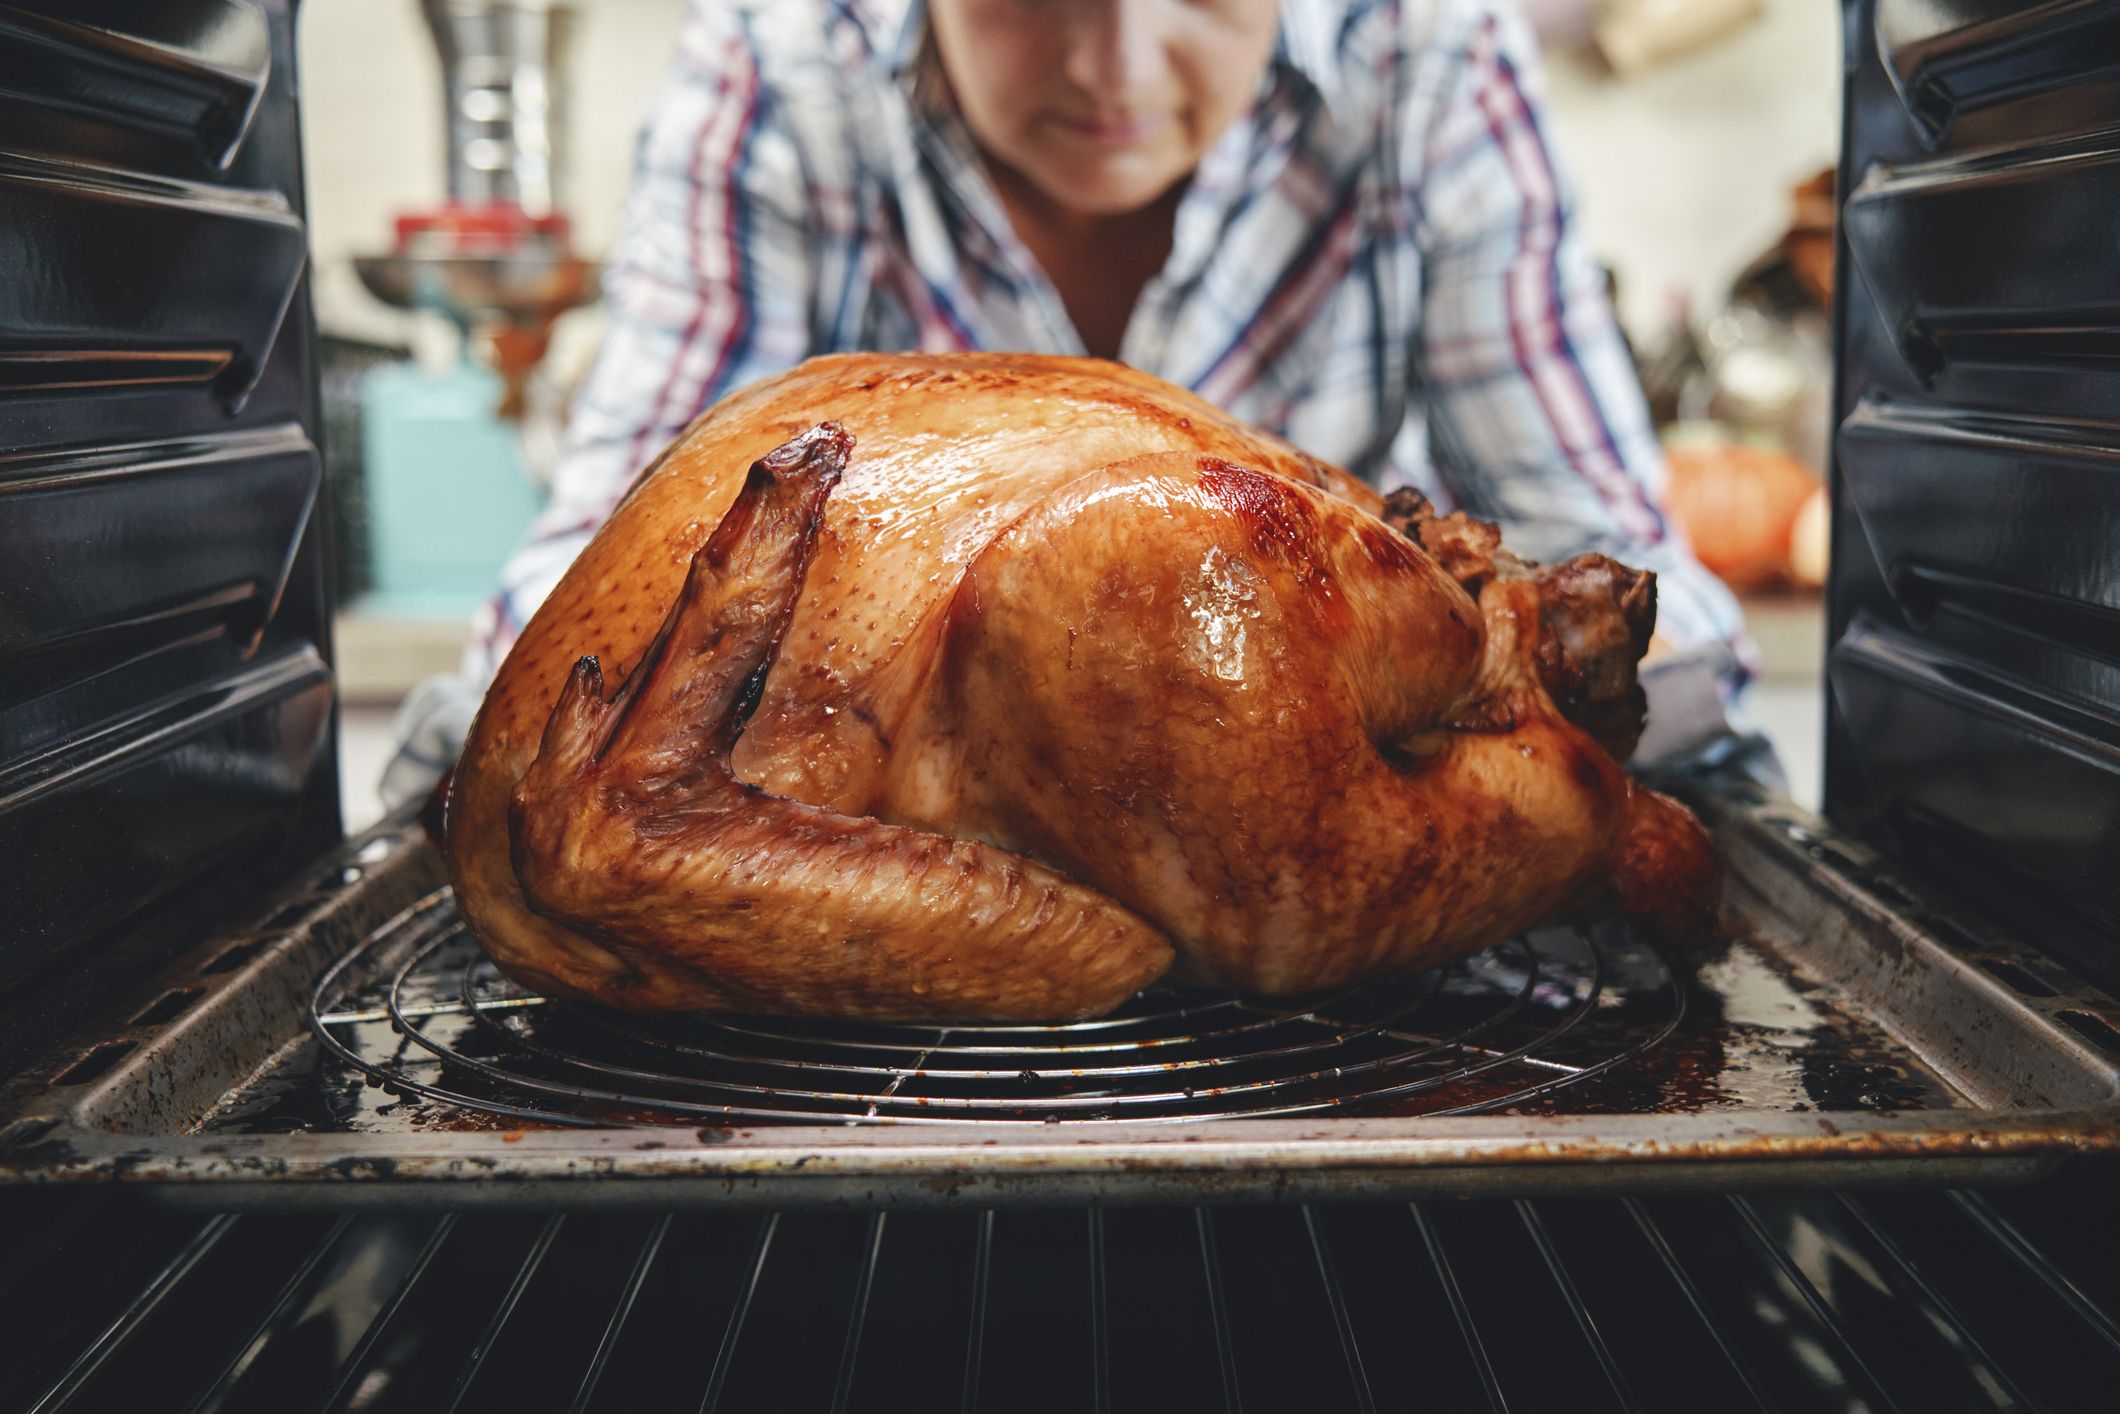 For those curious about my last post, I use a turkey roasting pot